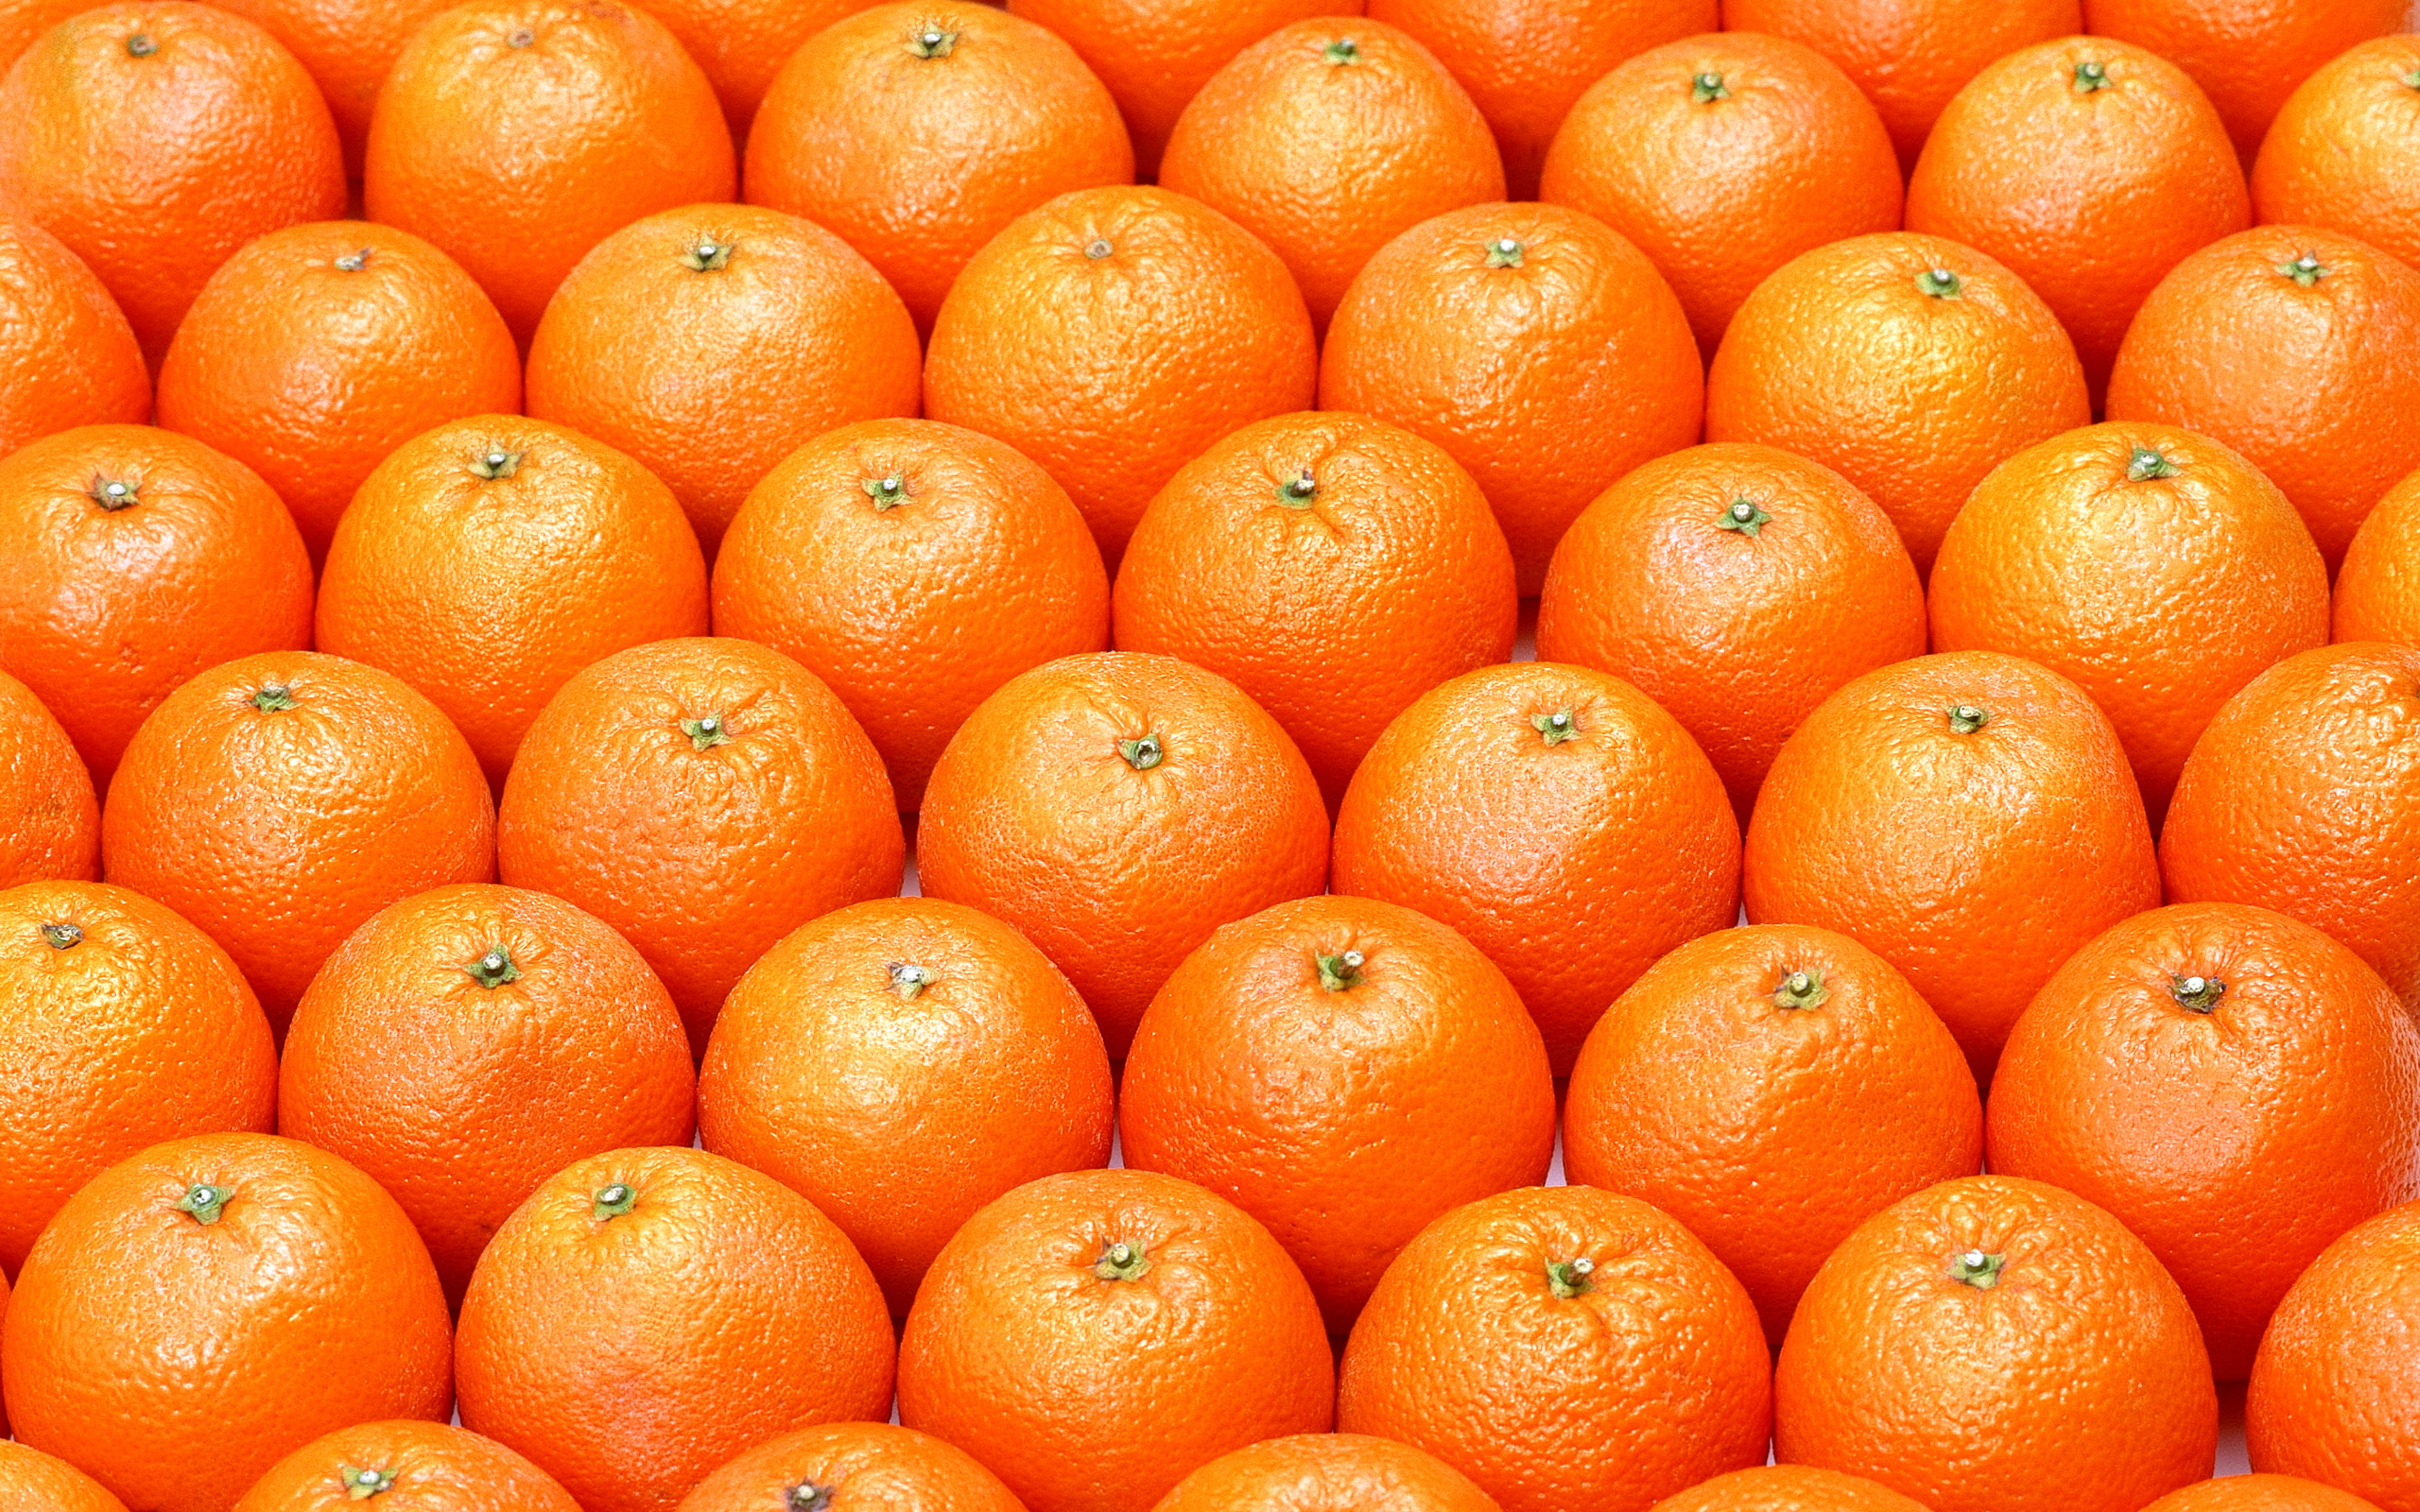 Oranges Wallpaper Gallery Yopriceville High Quality Image